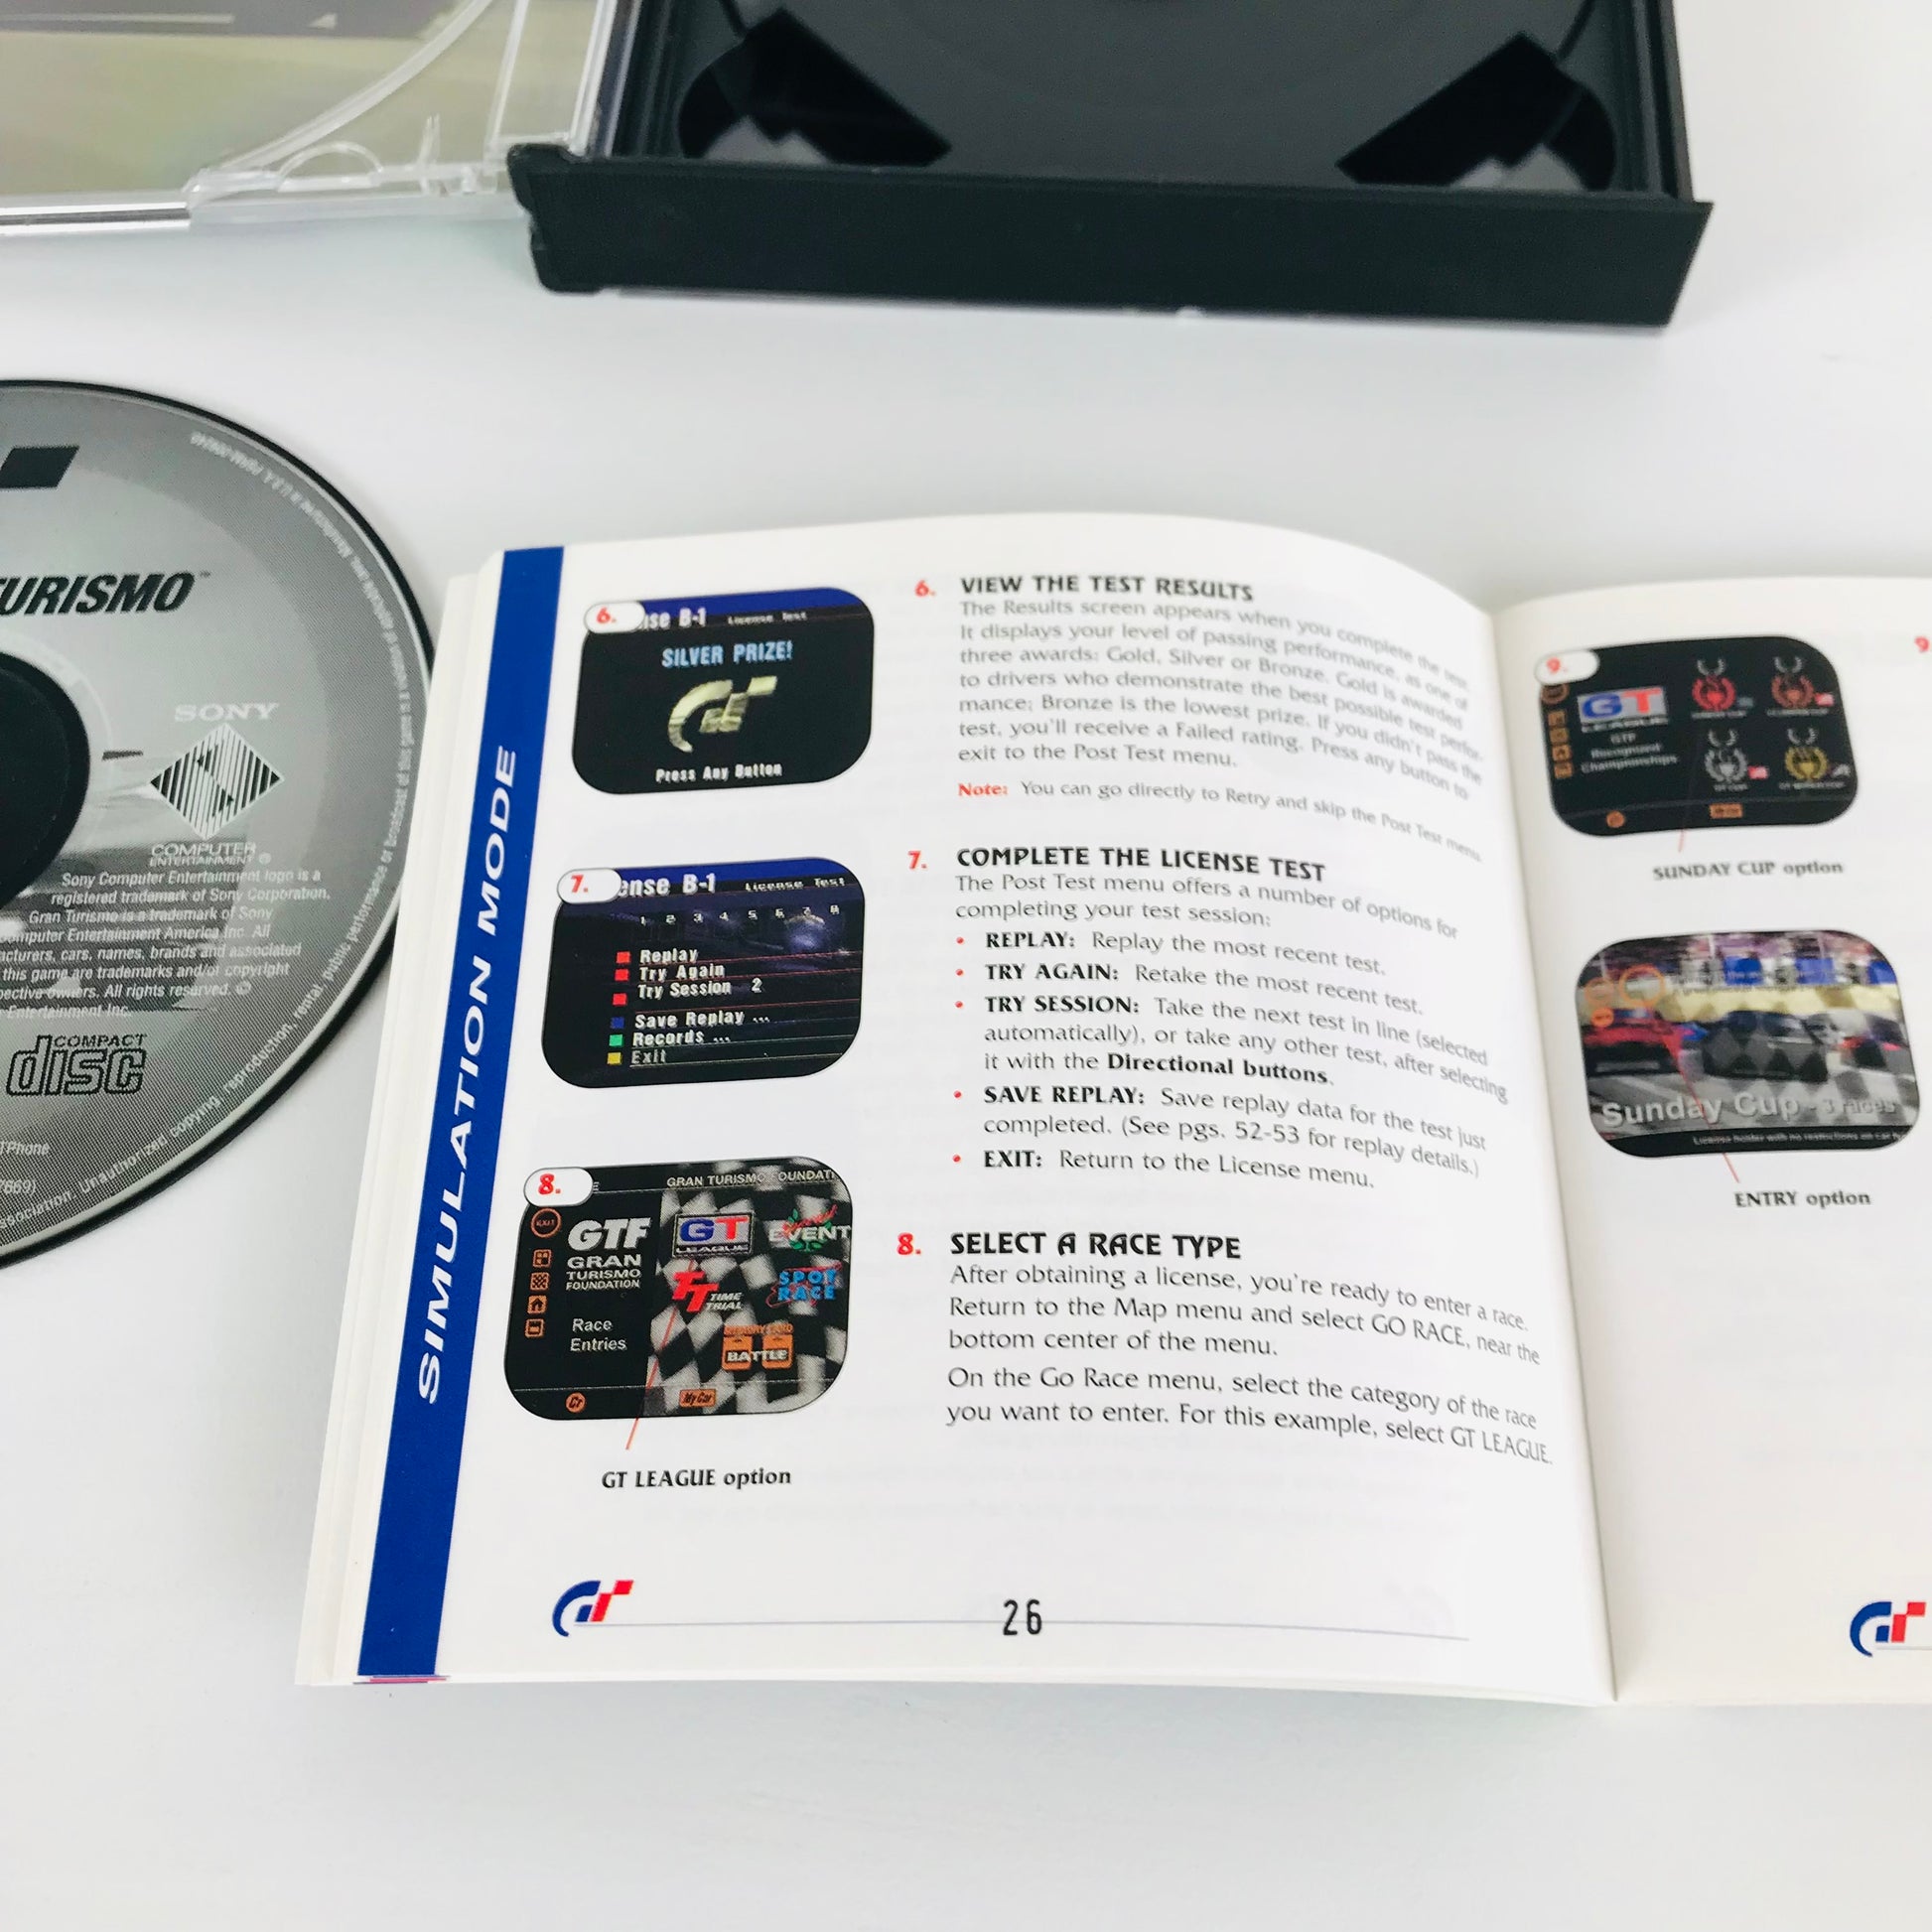 An inside look at the instructions booklet for the Gran Turismo PS1 video game.